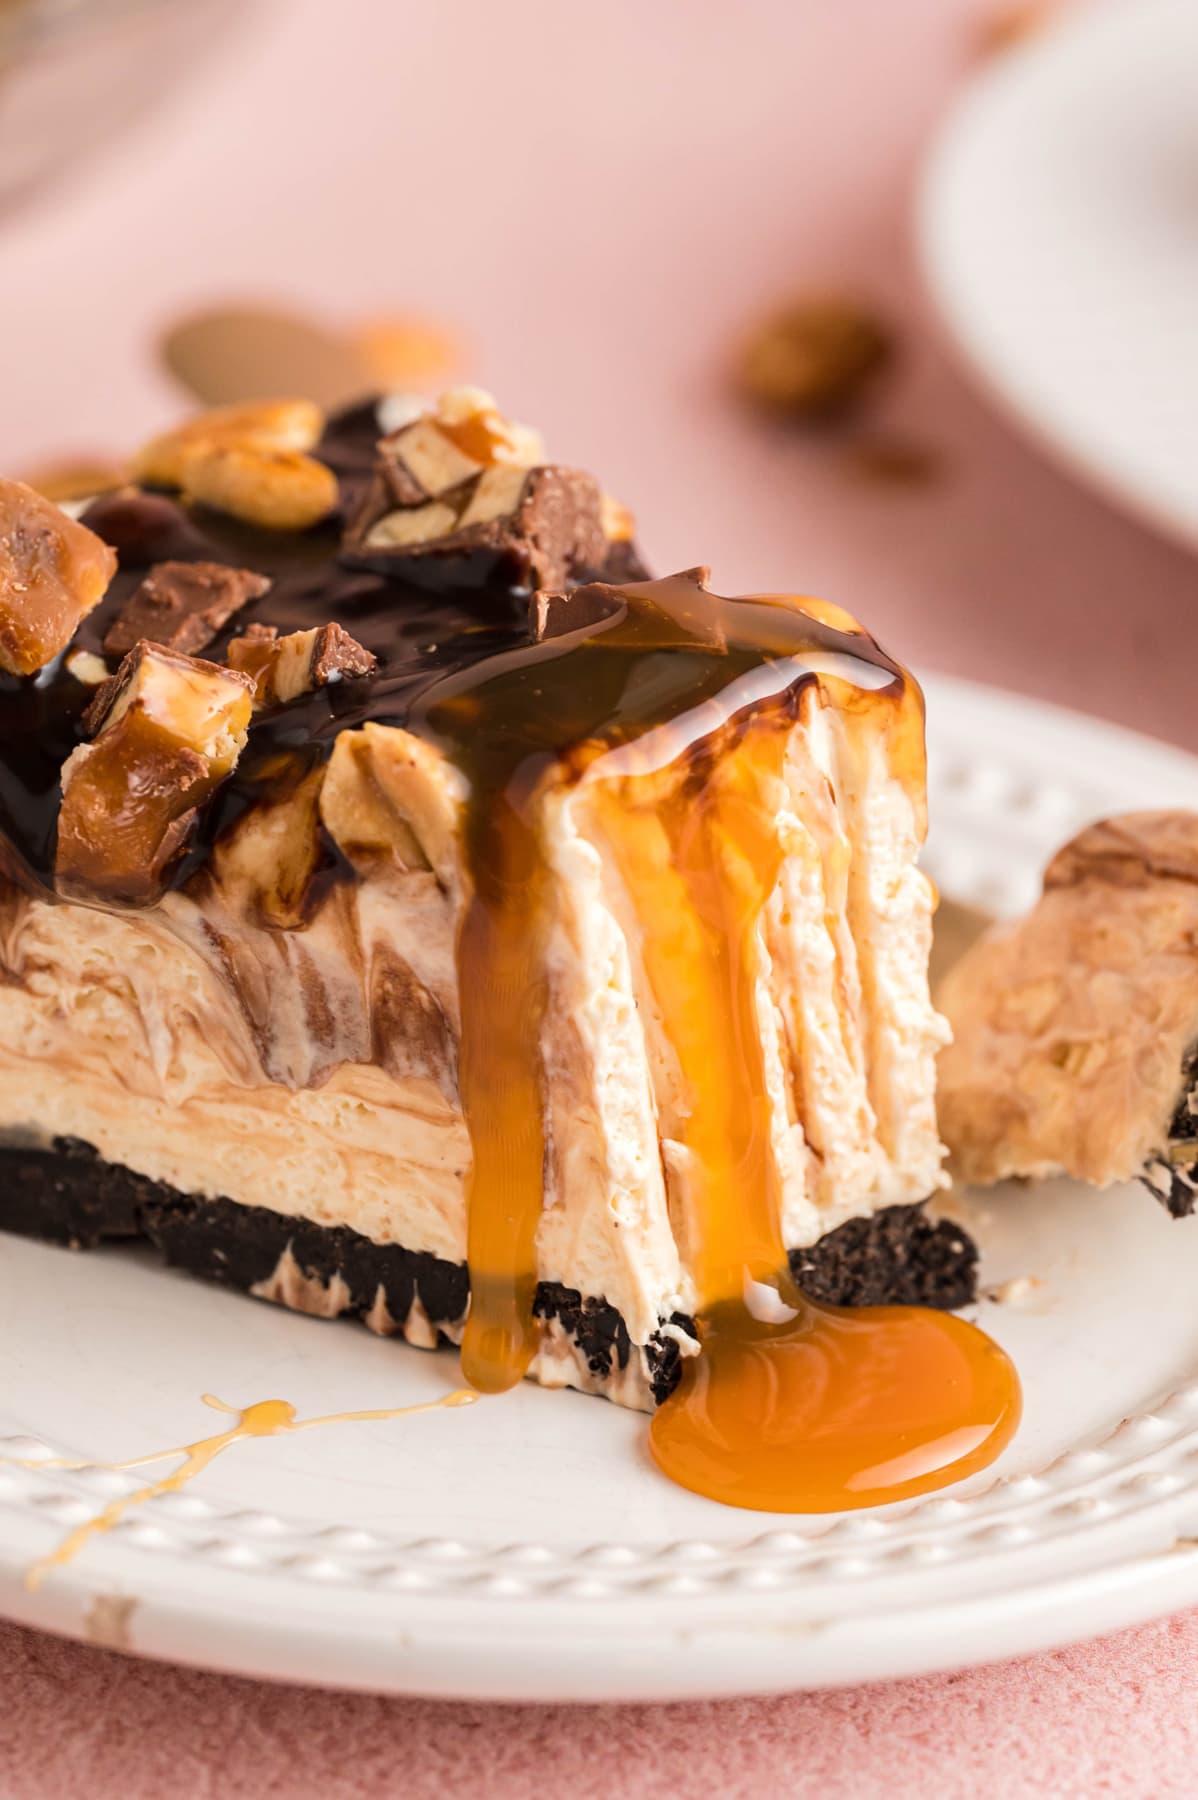 A slice of Snickers Pie with caramel sauce dripping down the sides.